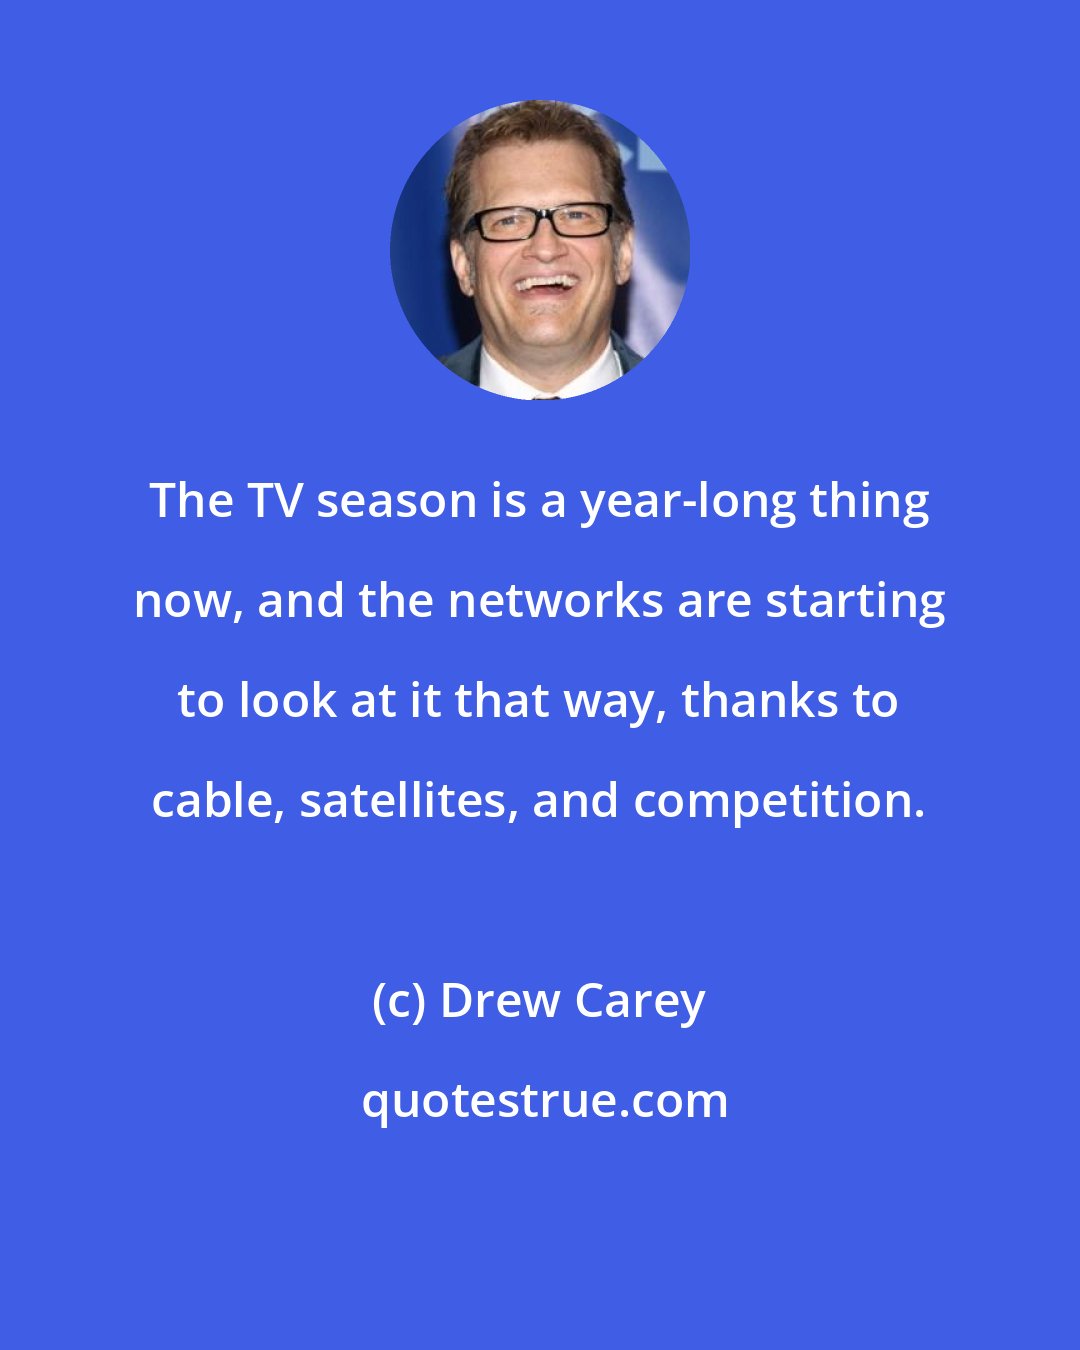 Drew Carey: The TV season is a year-long thing now, and the networks are starting to look at it that way, thanks to cable, satellites, and competition.